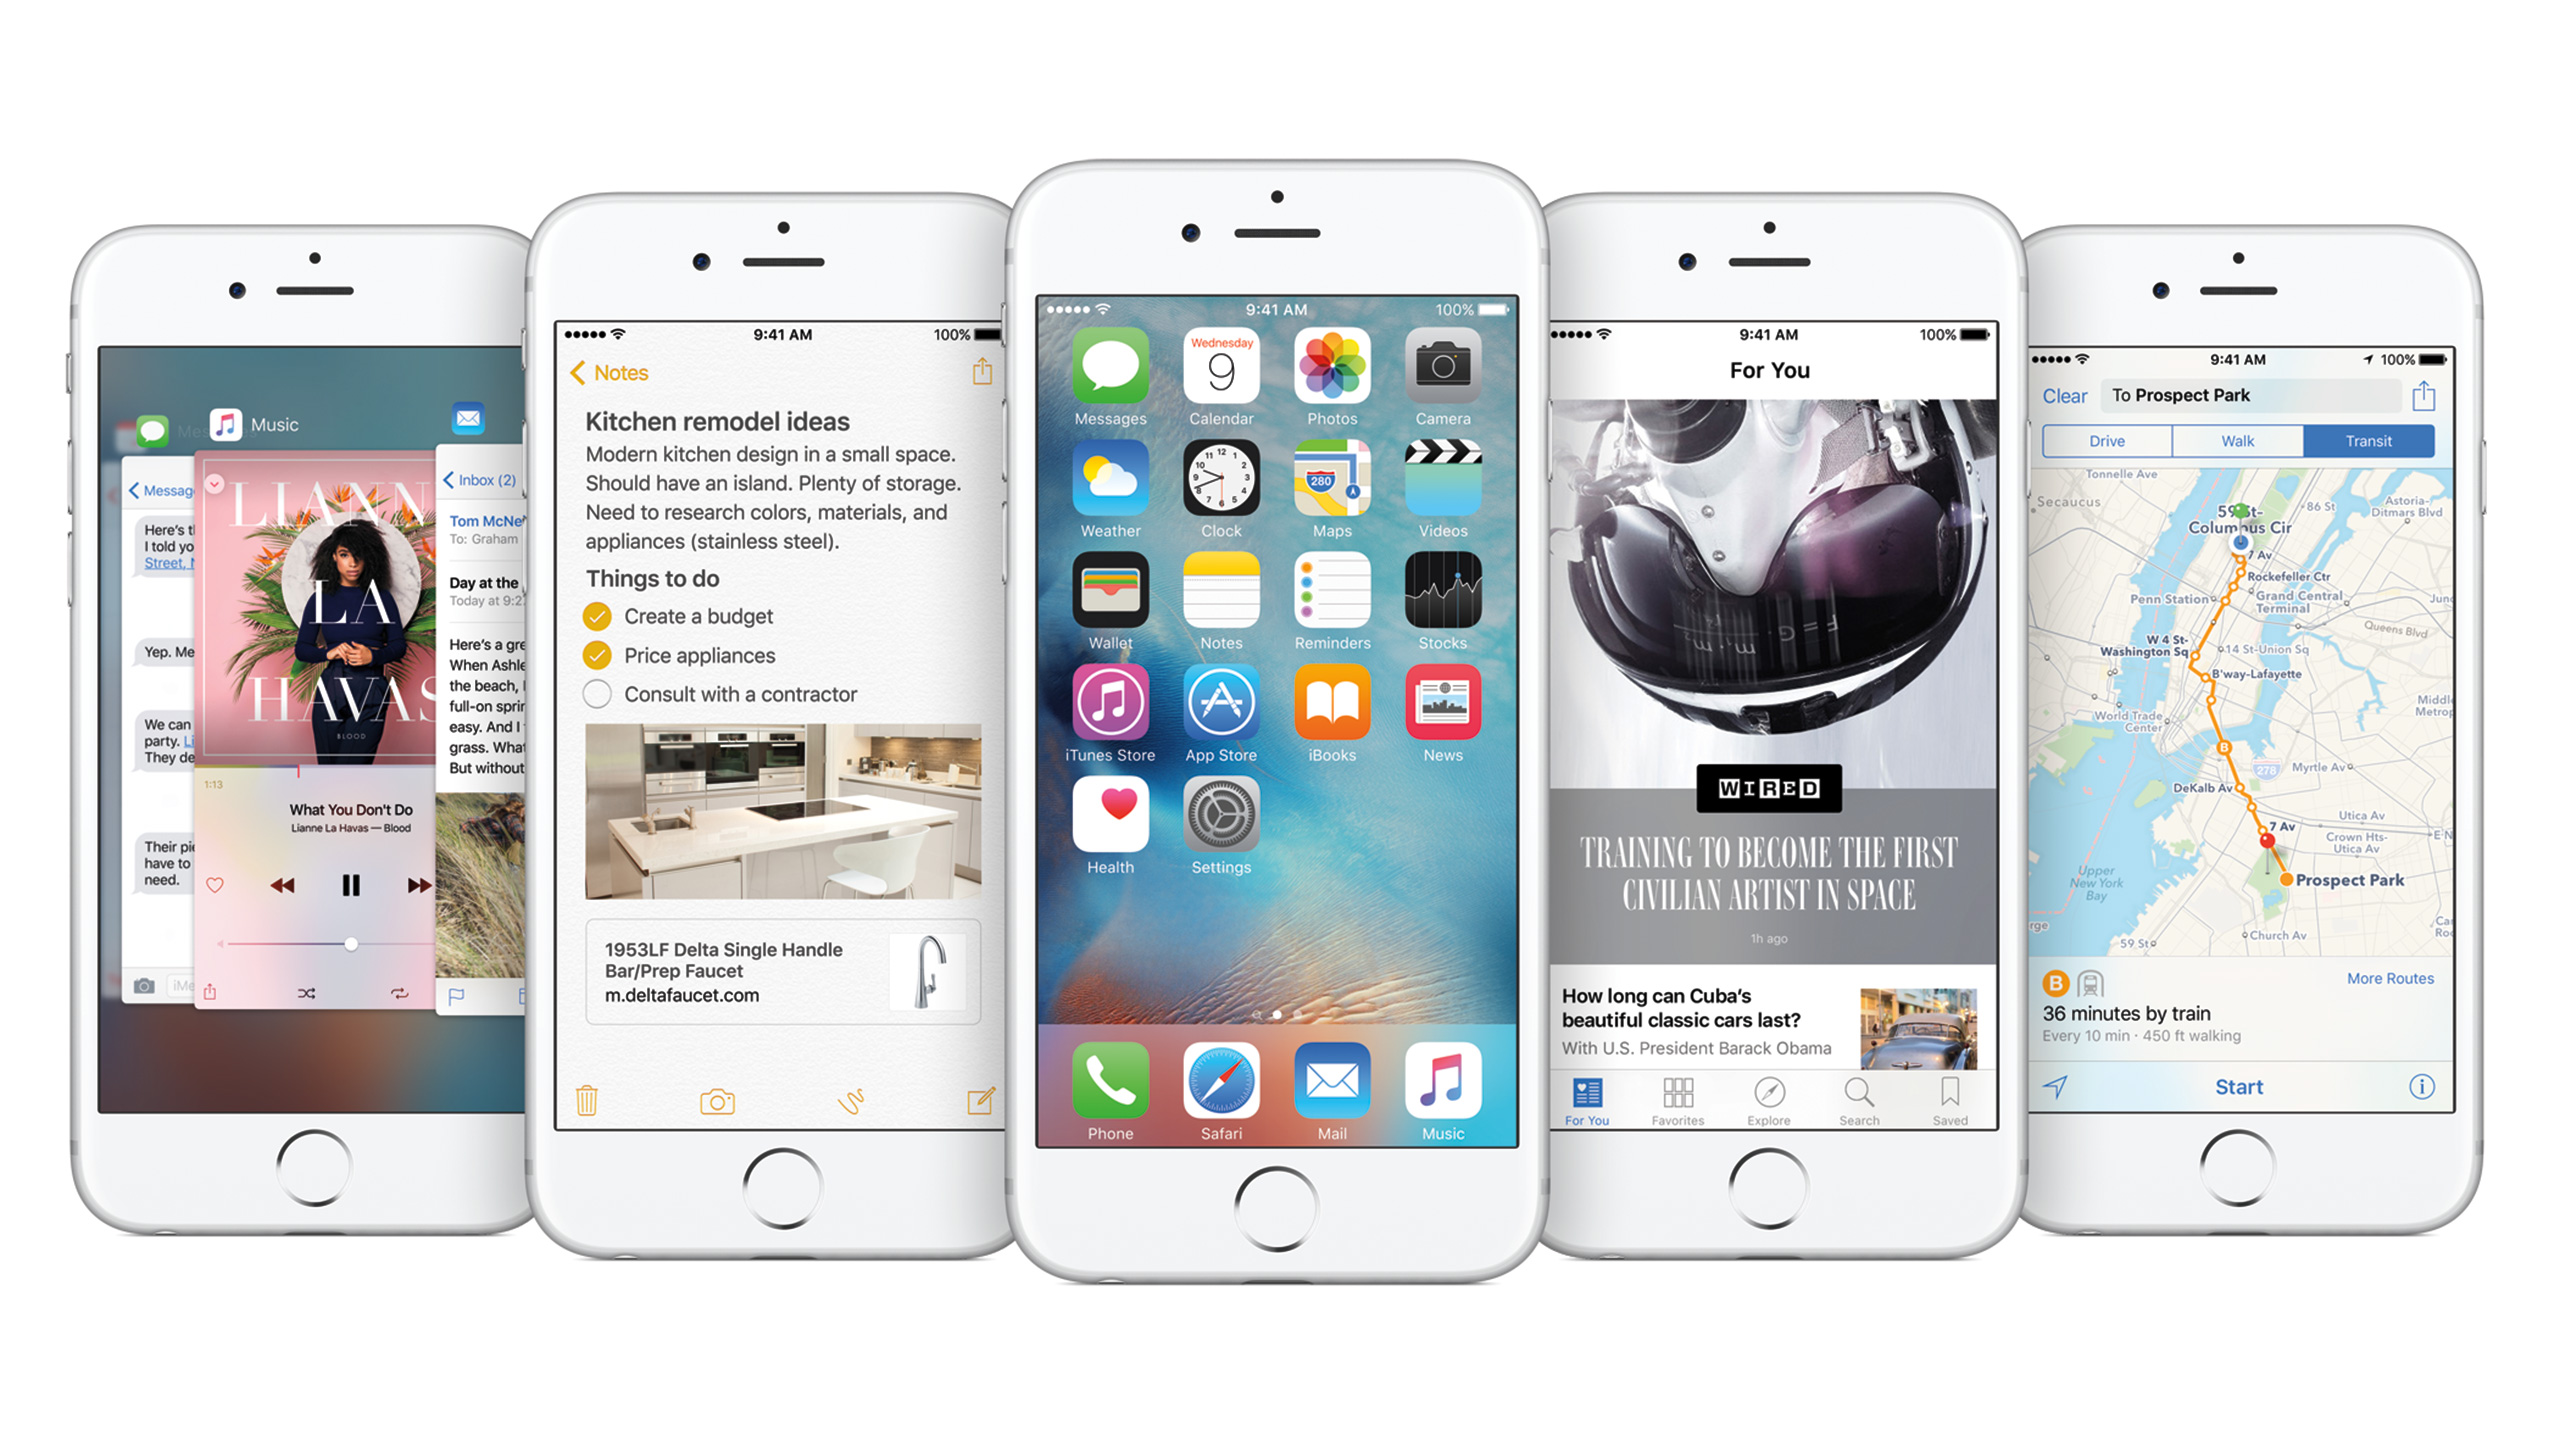 Apple Officially Releases iOS 9 [Download]